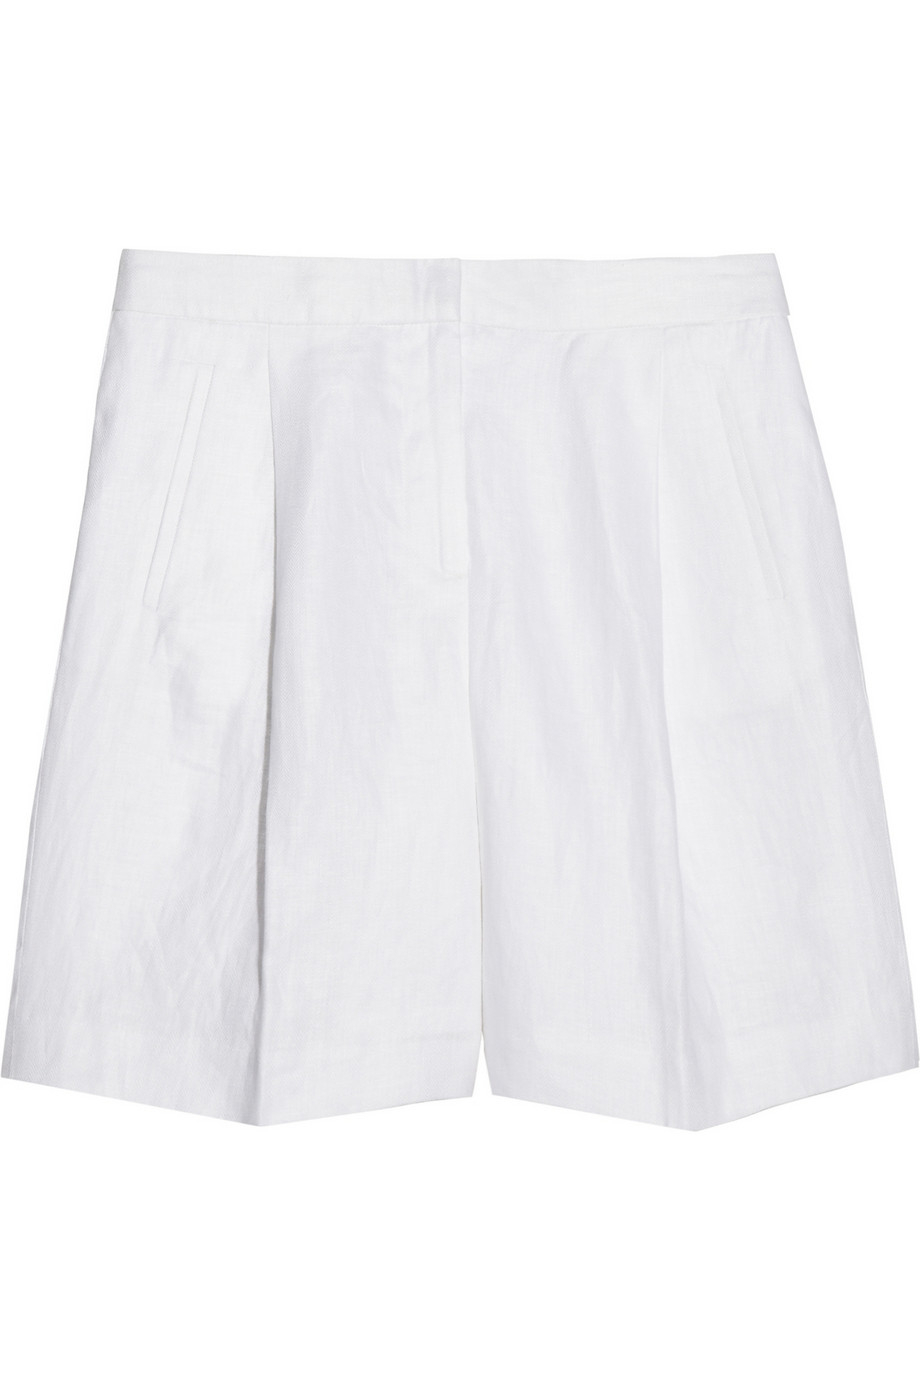 J.crew Collection Linen Bermuda Shorts in White | Lyst